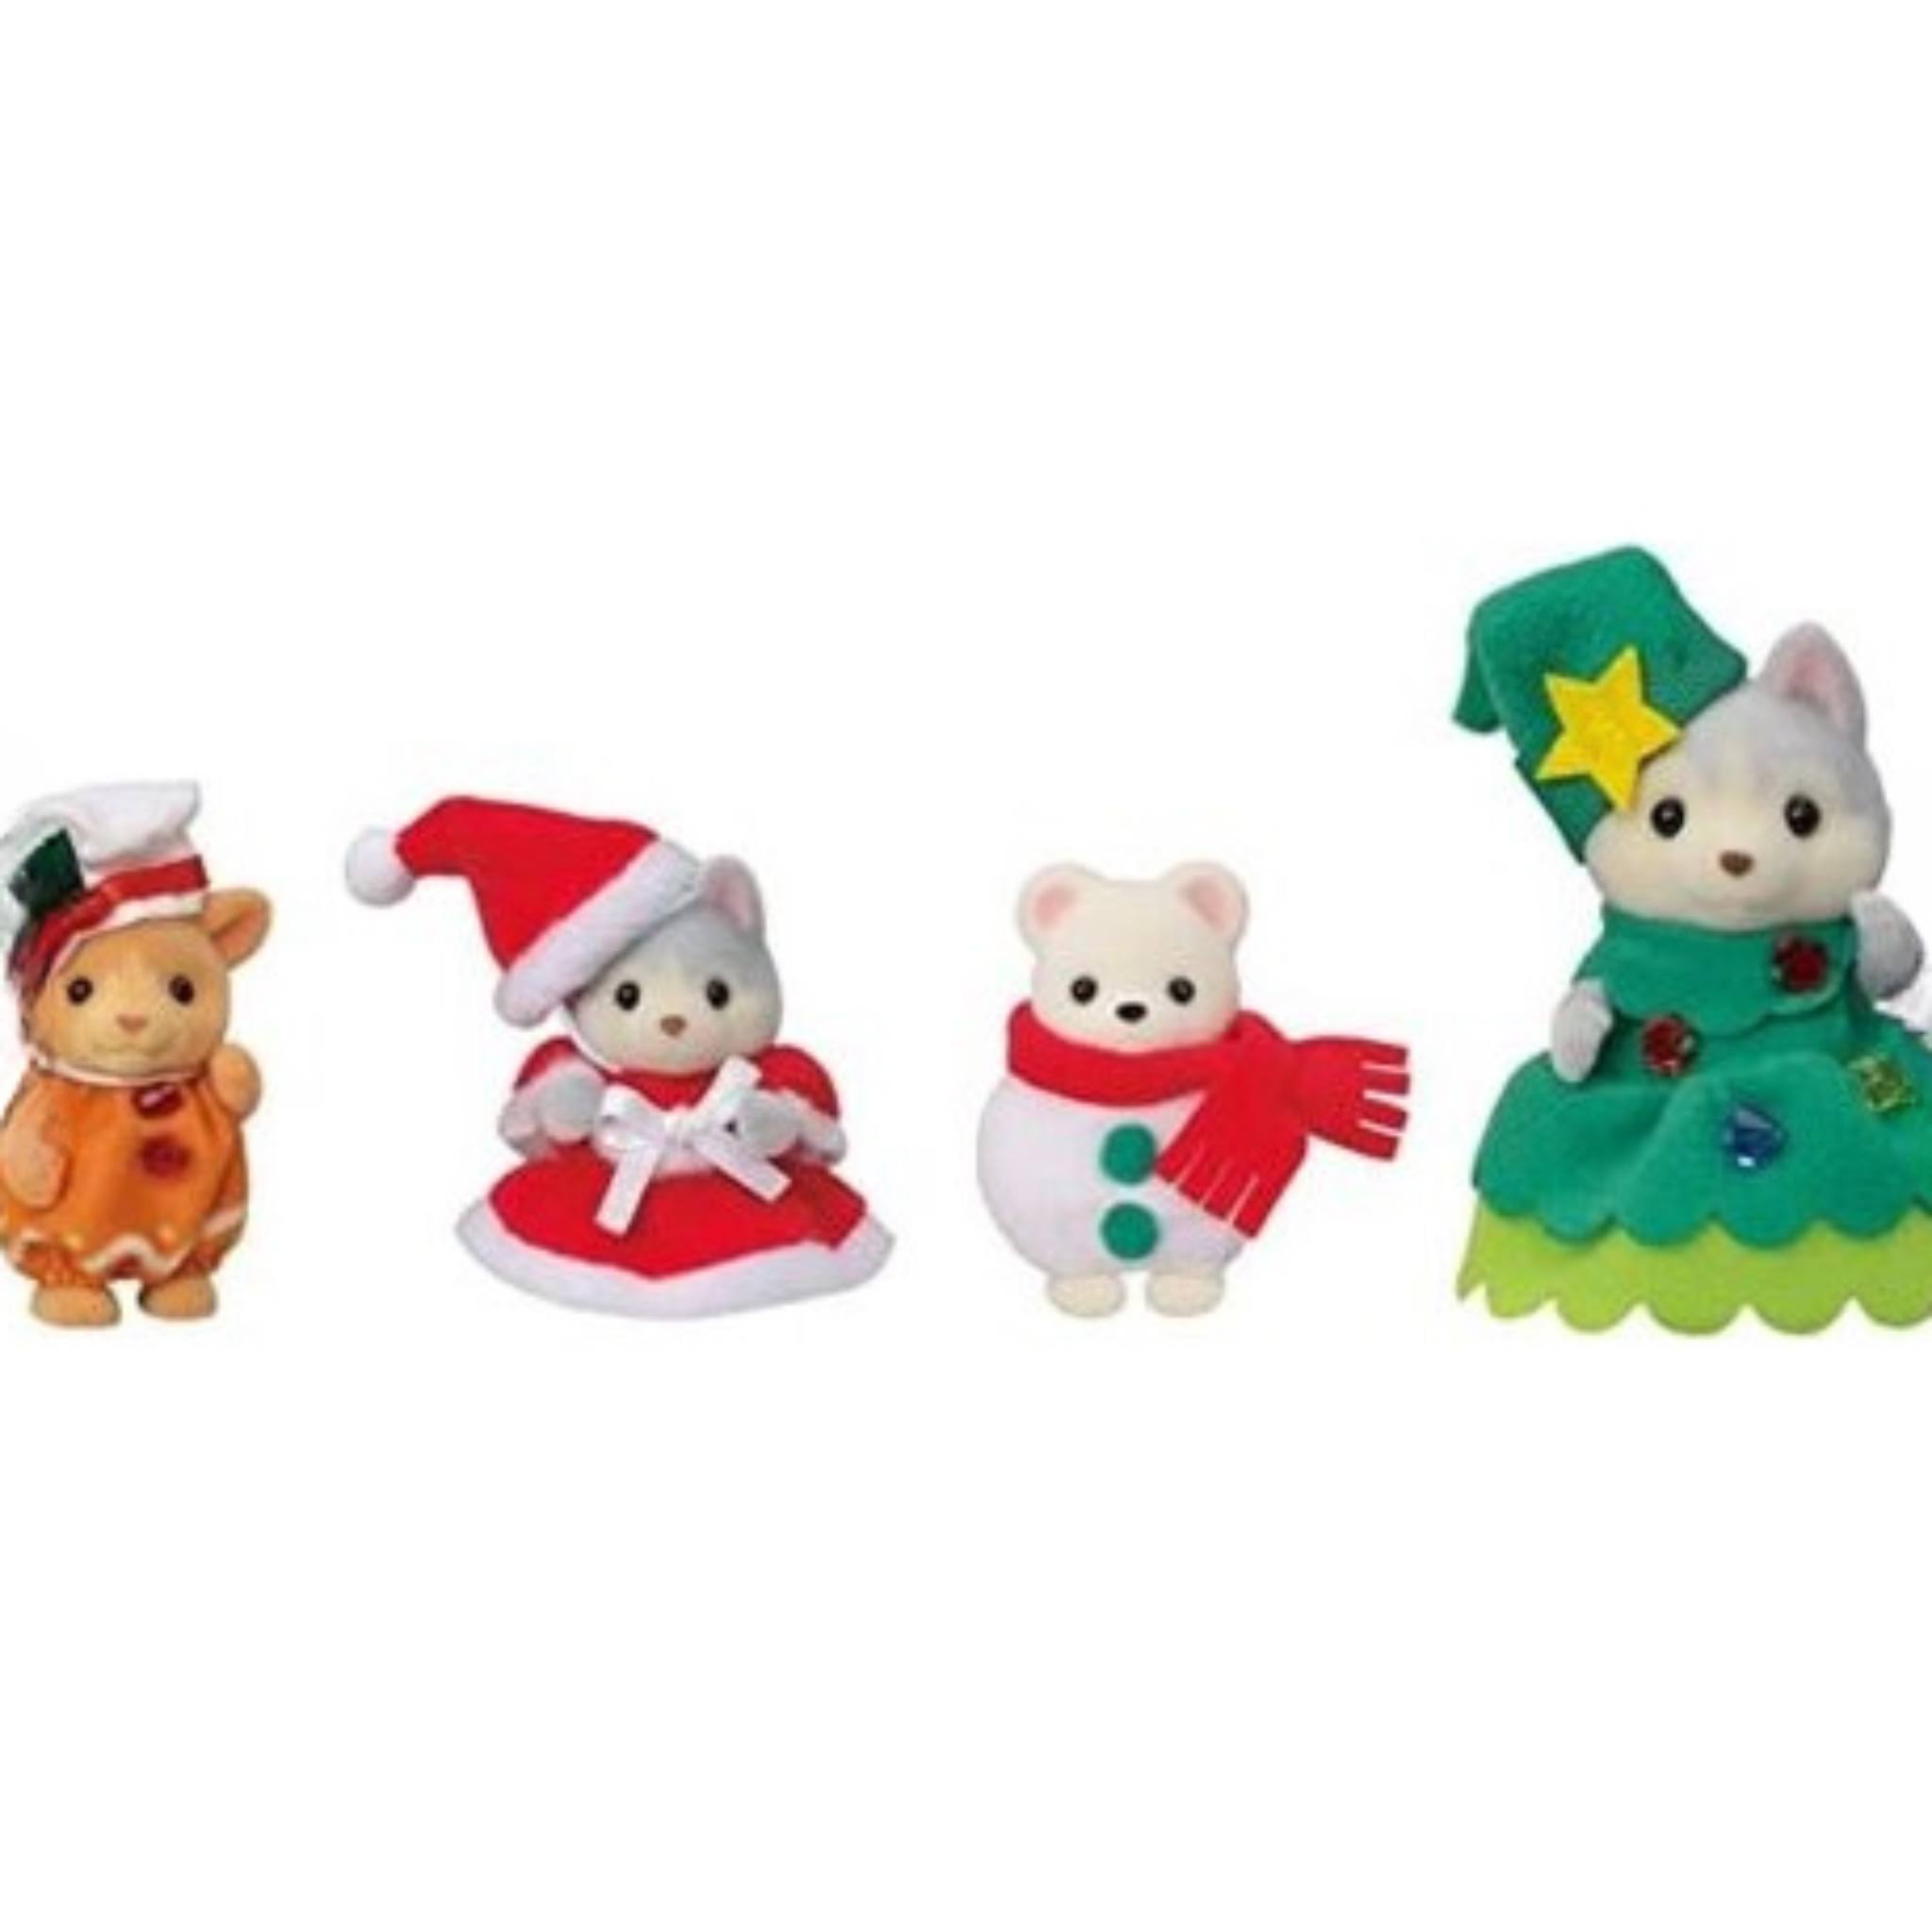 Calico Critters Happy Christmas Friends